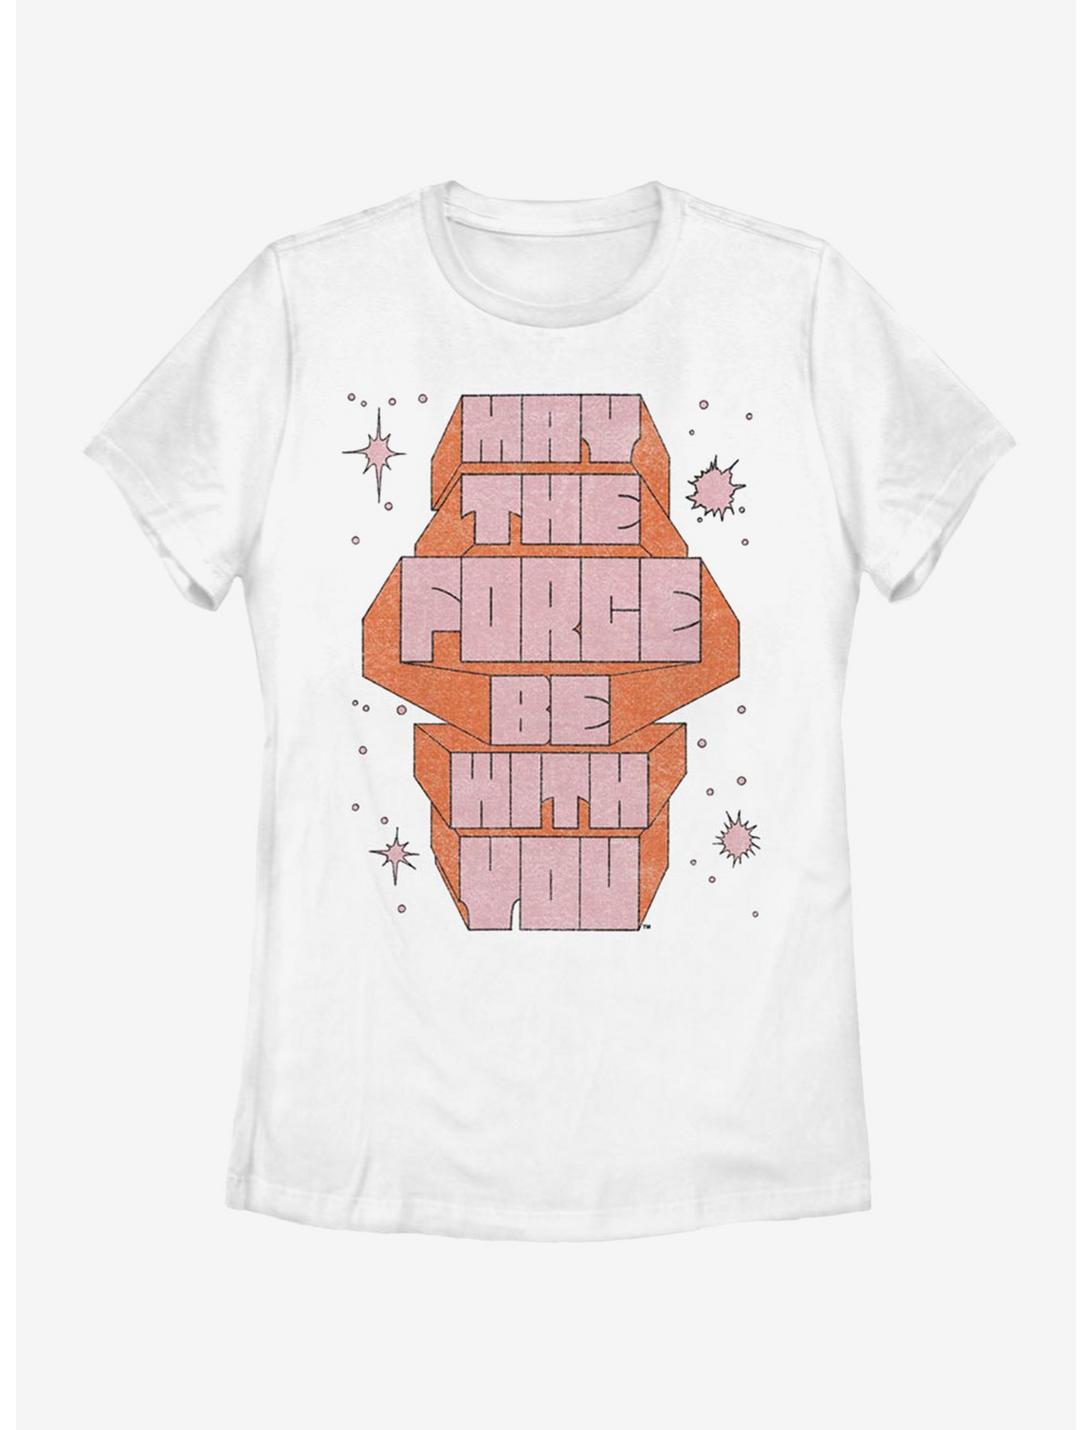 Star Wars May The Force Be With You Womens T-Shirt, WHITE, hi-res